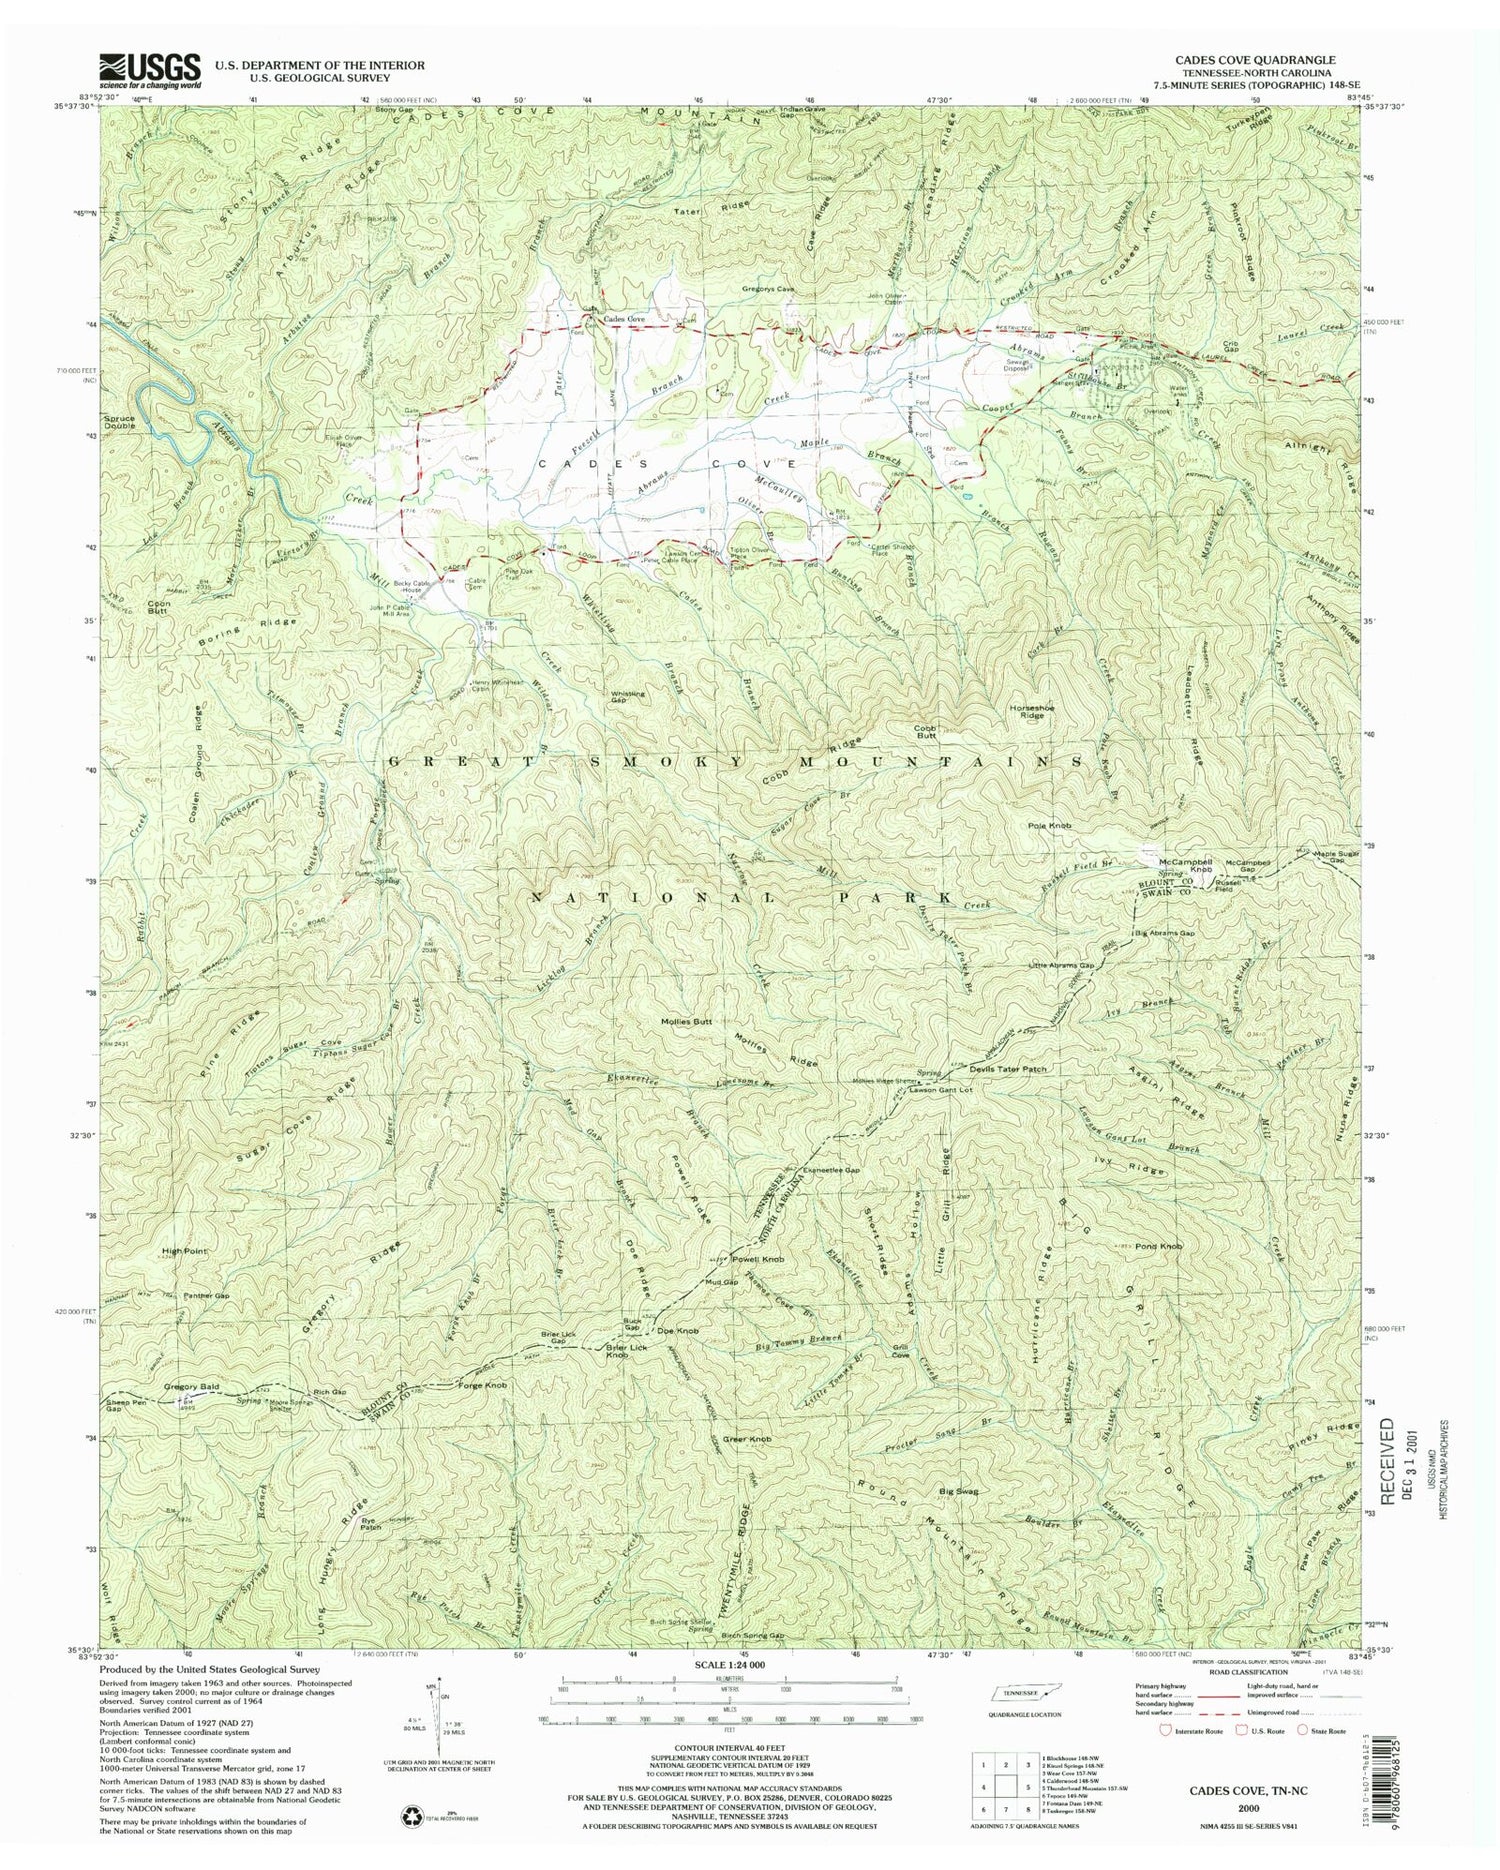 USGS Classic Cades Cove Tennessee 7.5'x7.5' Topo Map Image